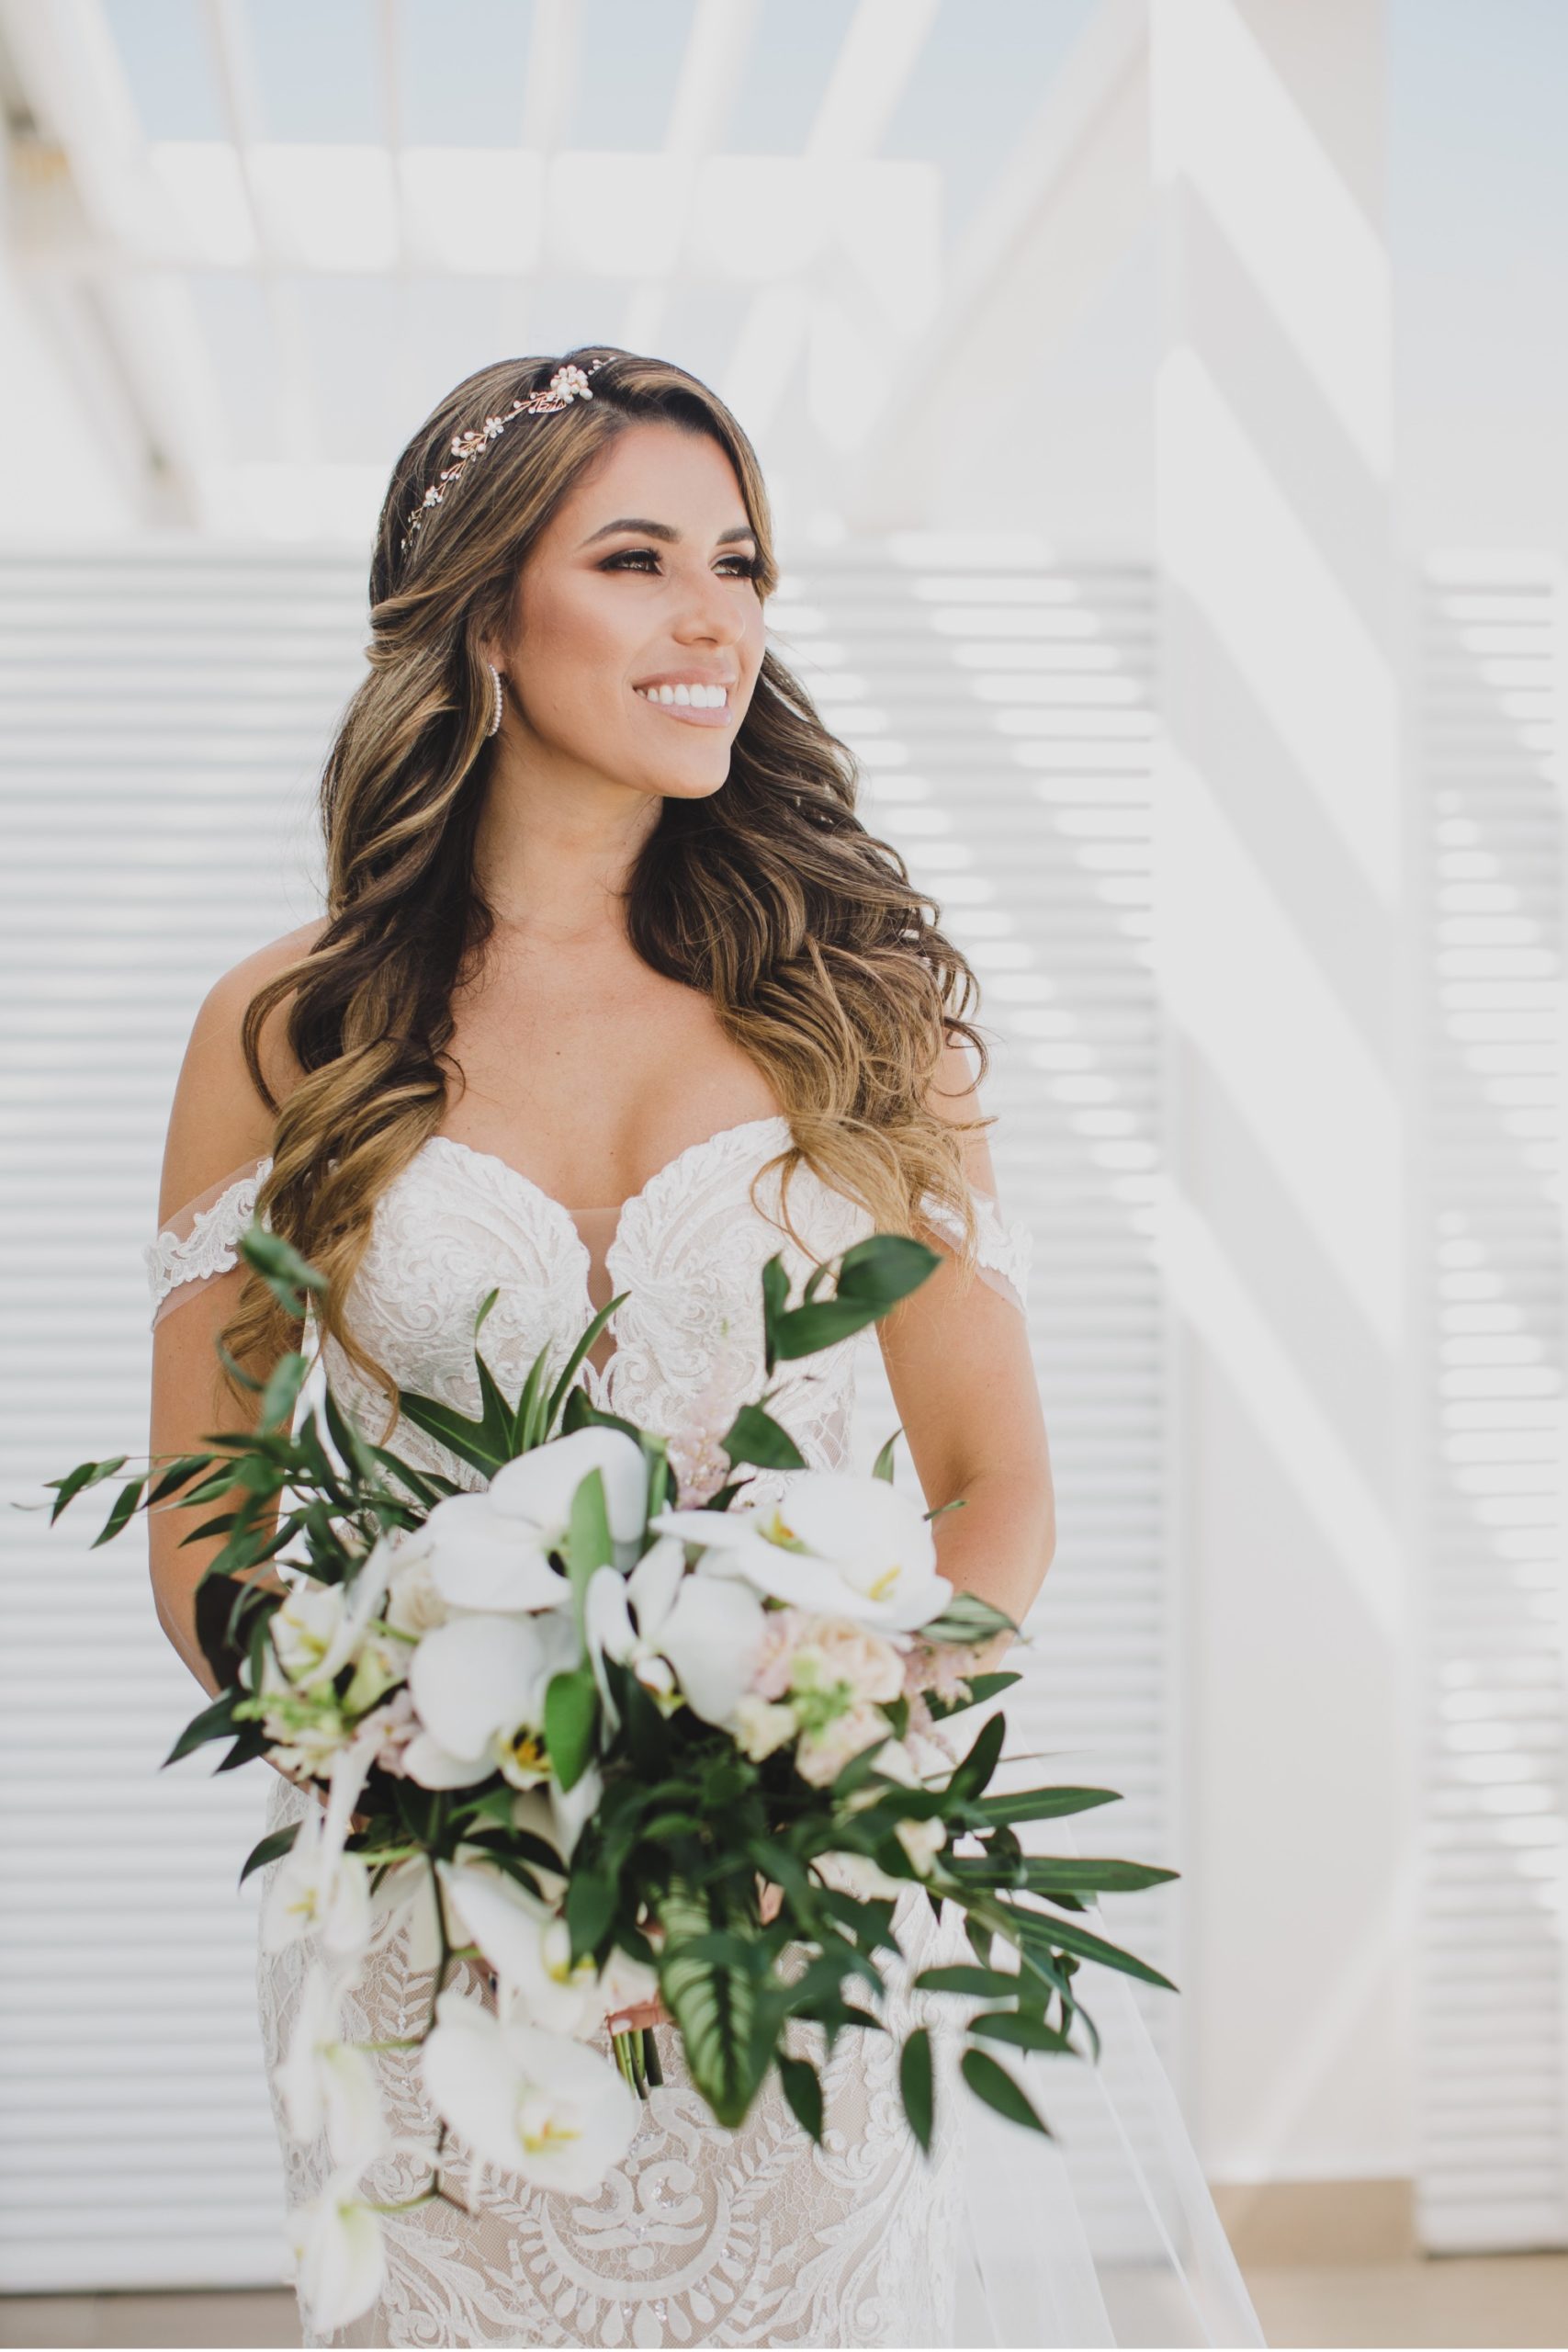 Beautiful bride with large white orchid bouquet